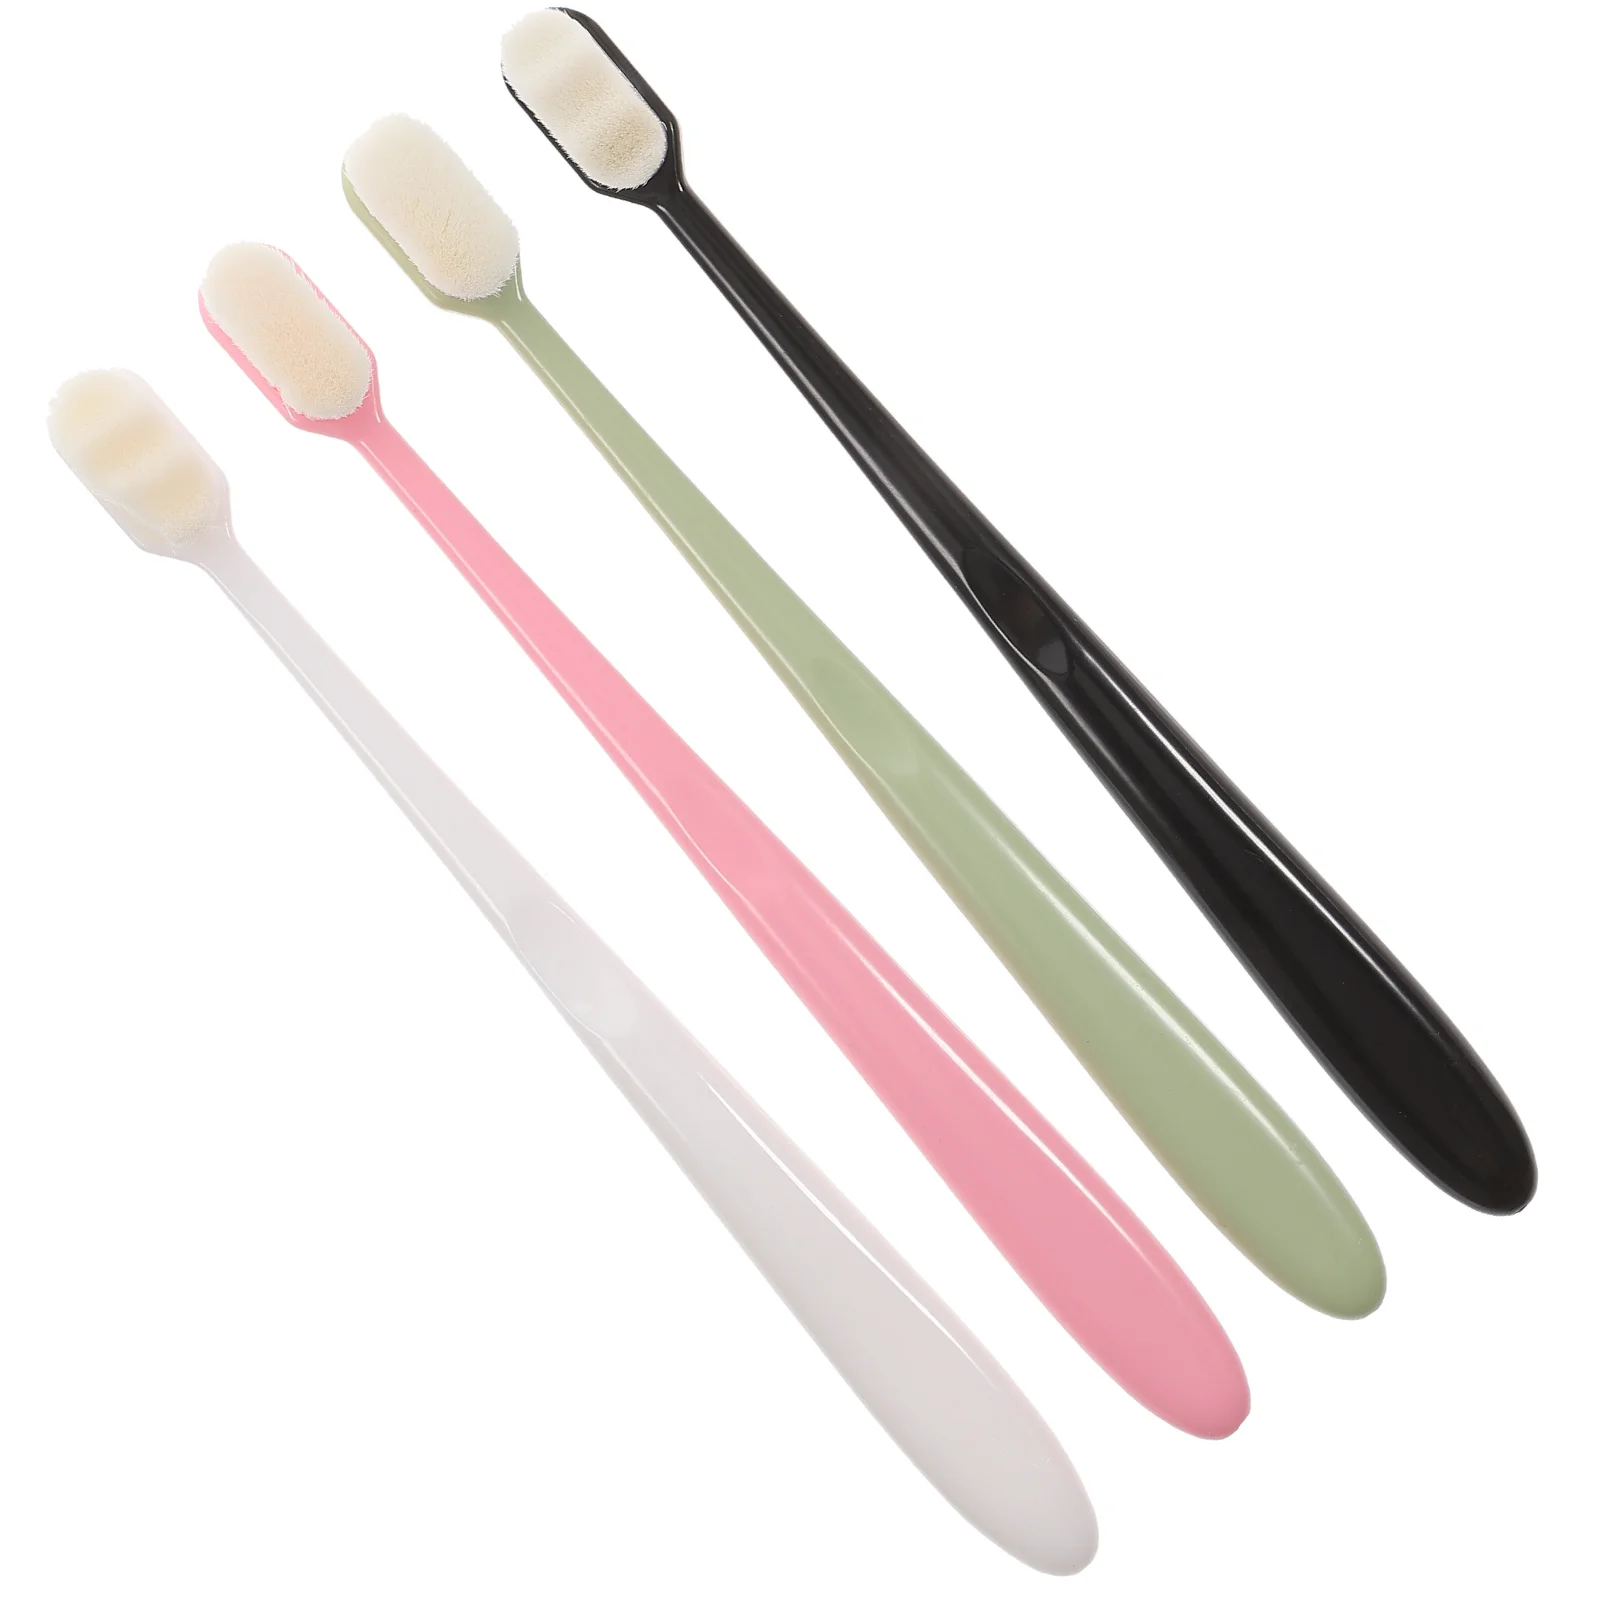 

4 Pcs Soft Toothbrush Travel Toothbrushes for Adults Portable Extra Gums Fine Bristles Manual Cleaning Super Kid